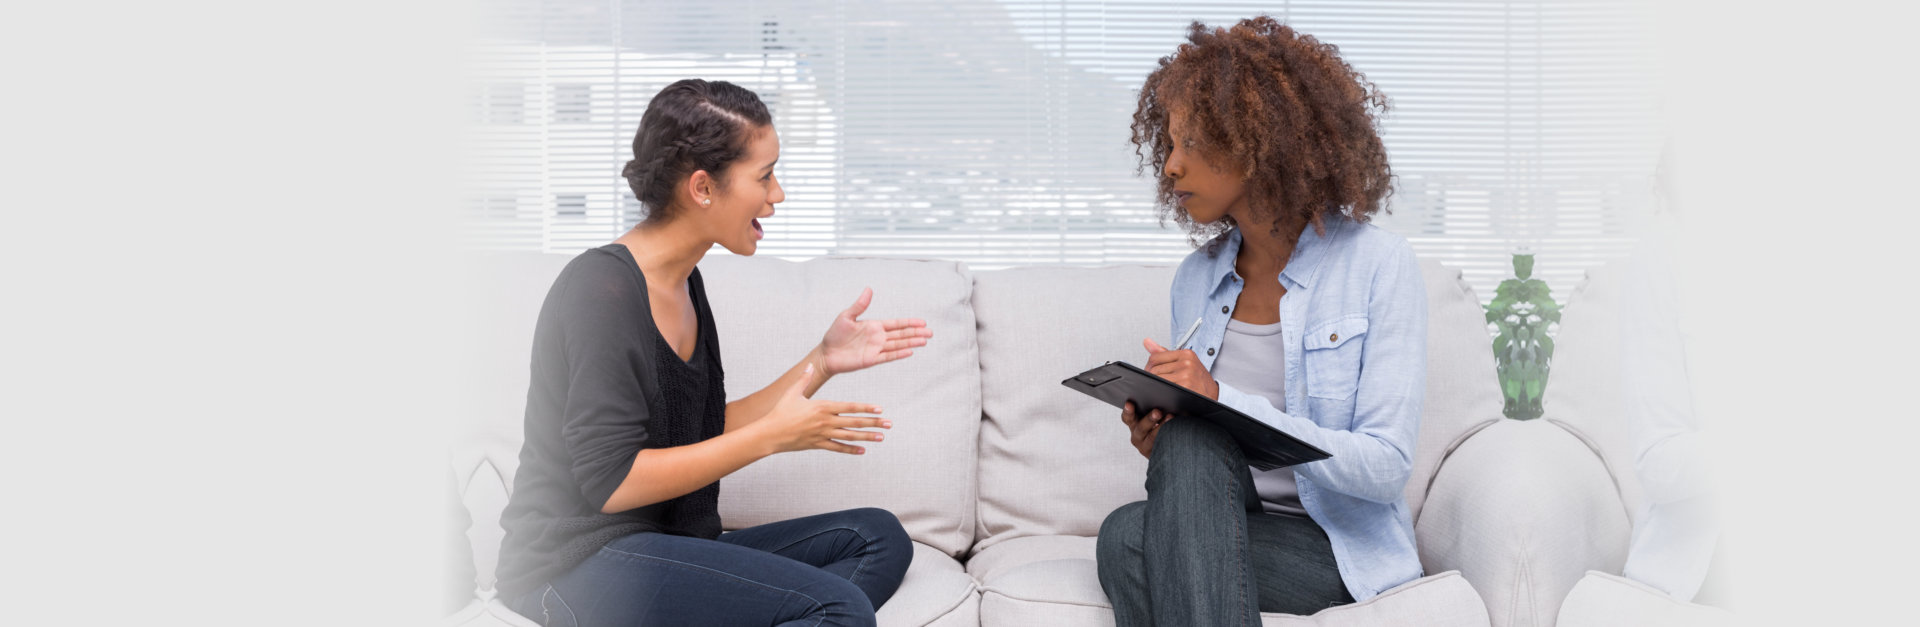 professional woman and client woman having conversation